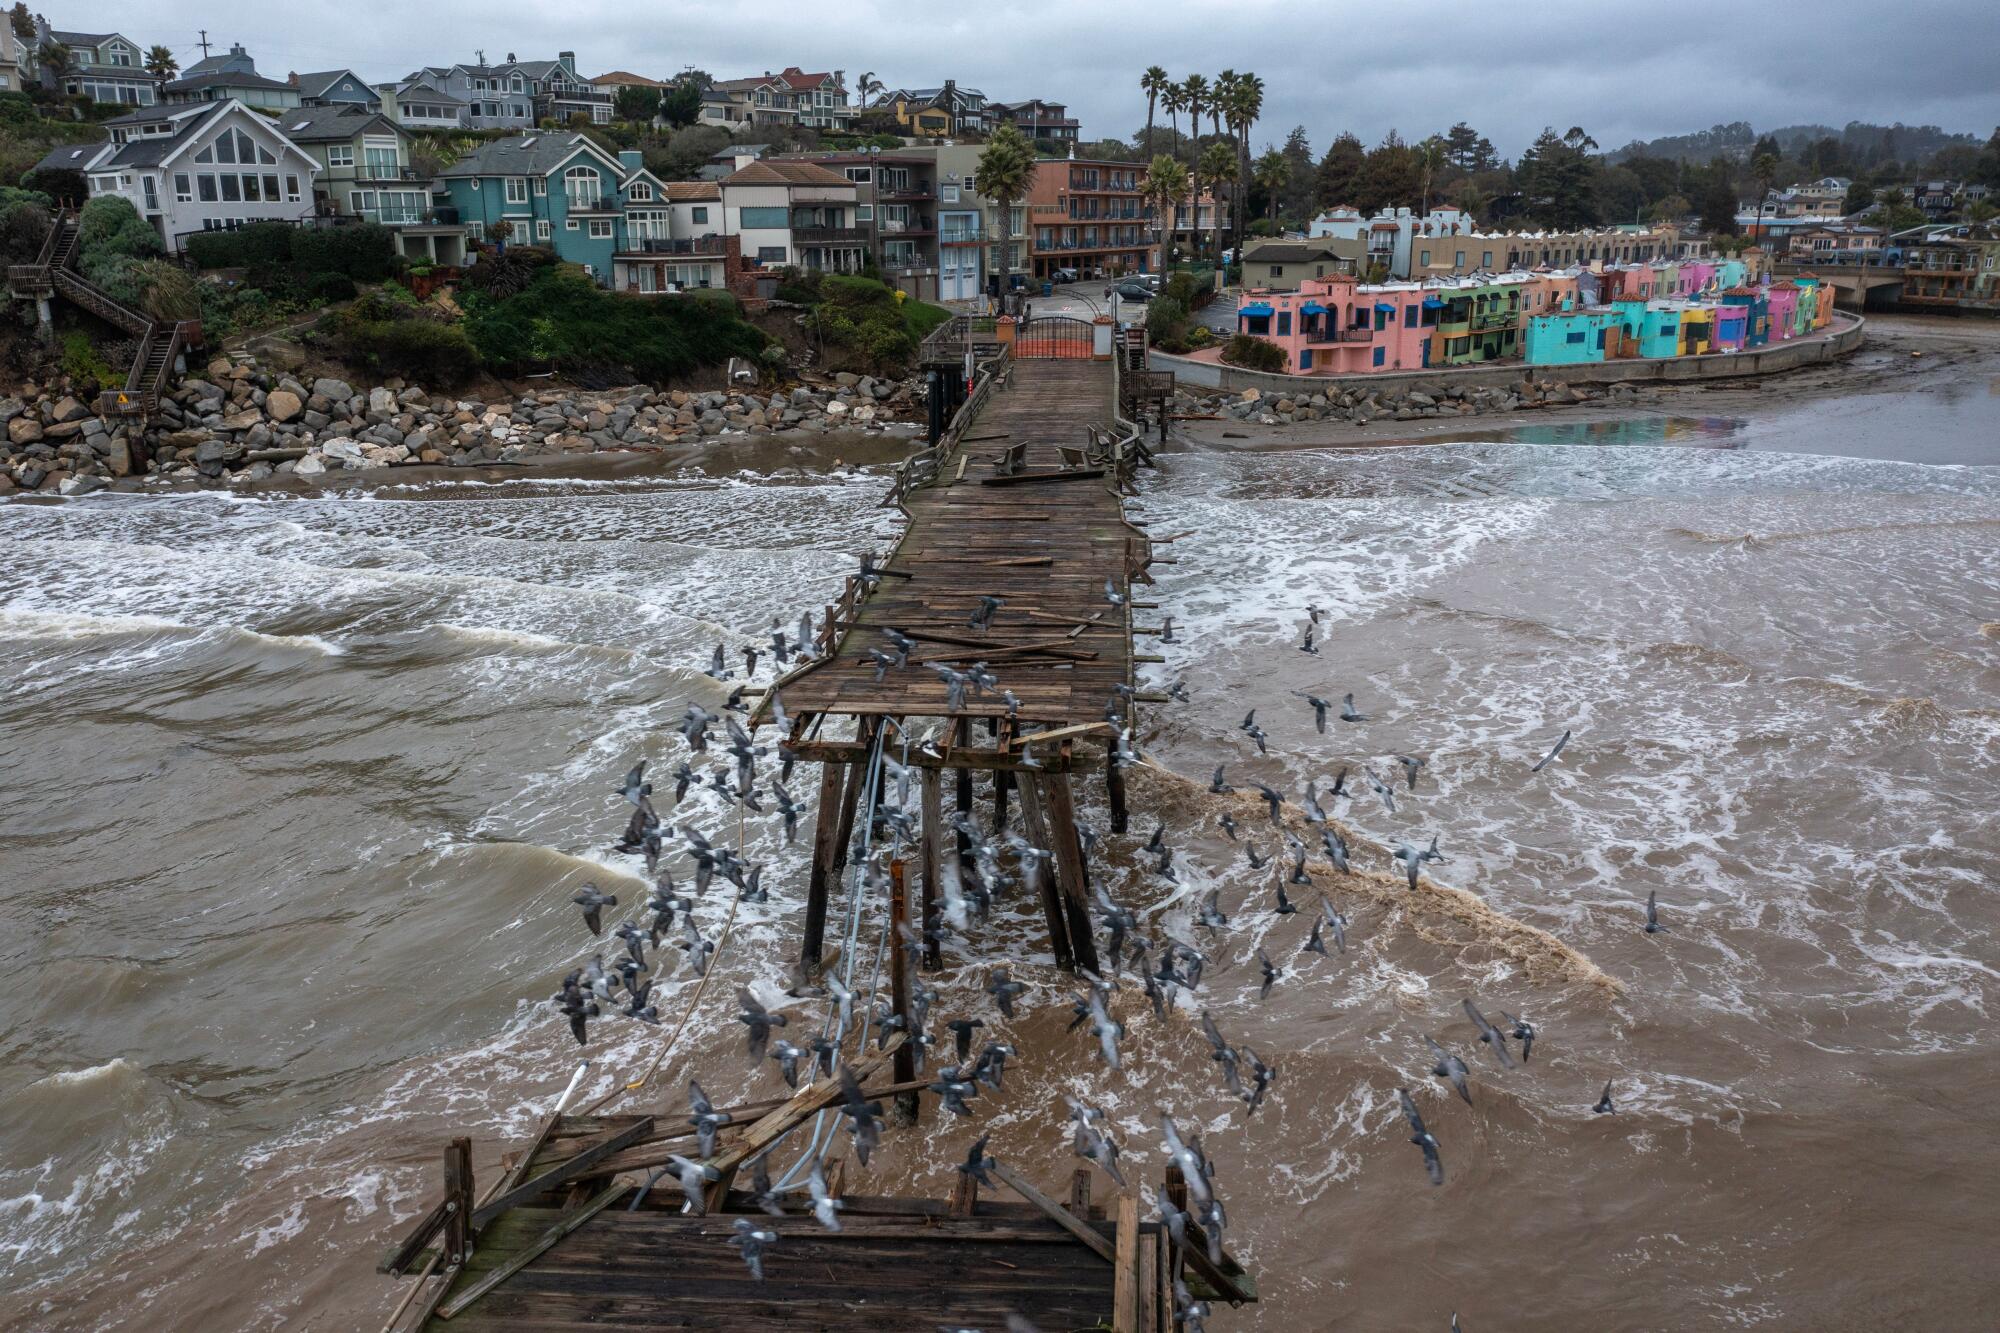 An aerial view shows the Capitola Pier damaged after a series of storms in January.